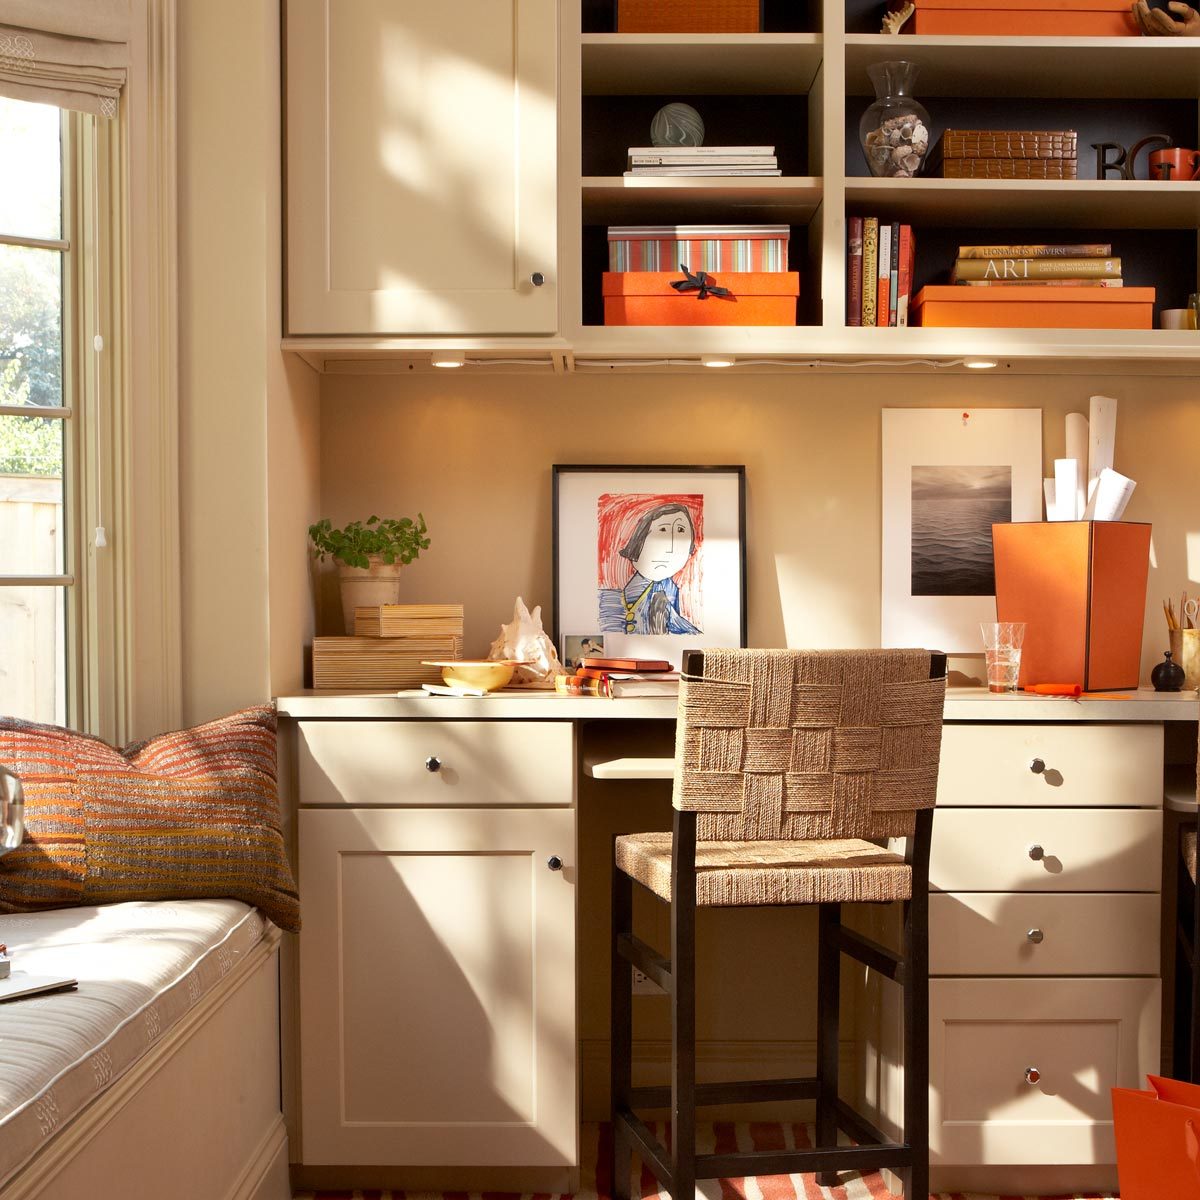 Small Home Office Ideas With Storage - krkfm